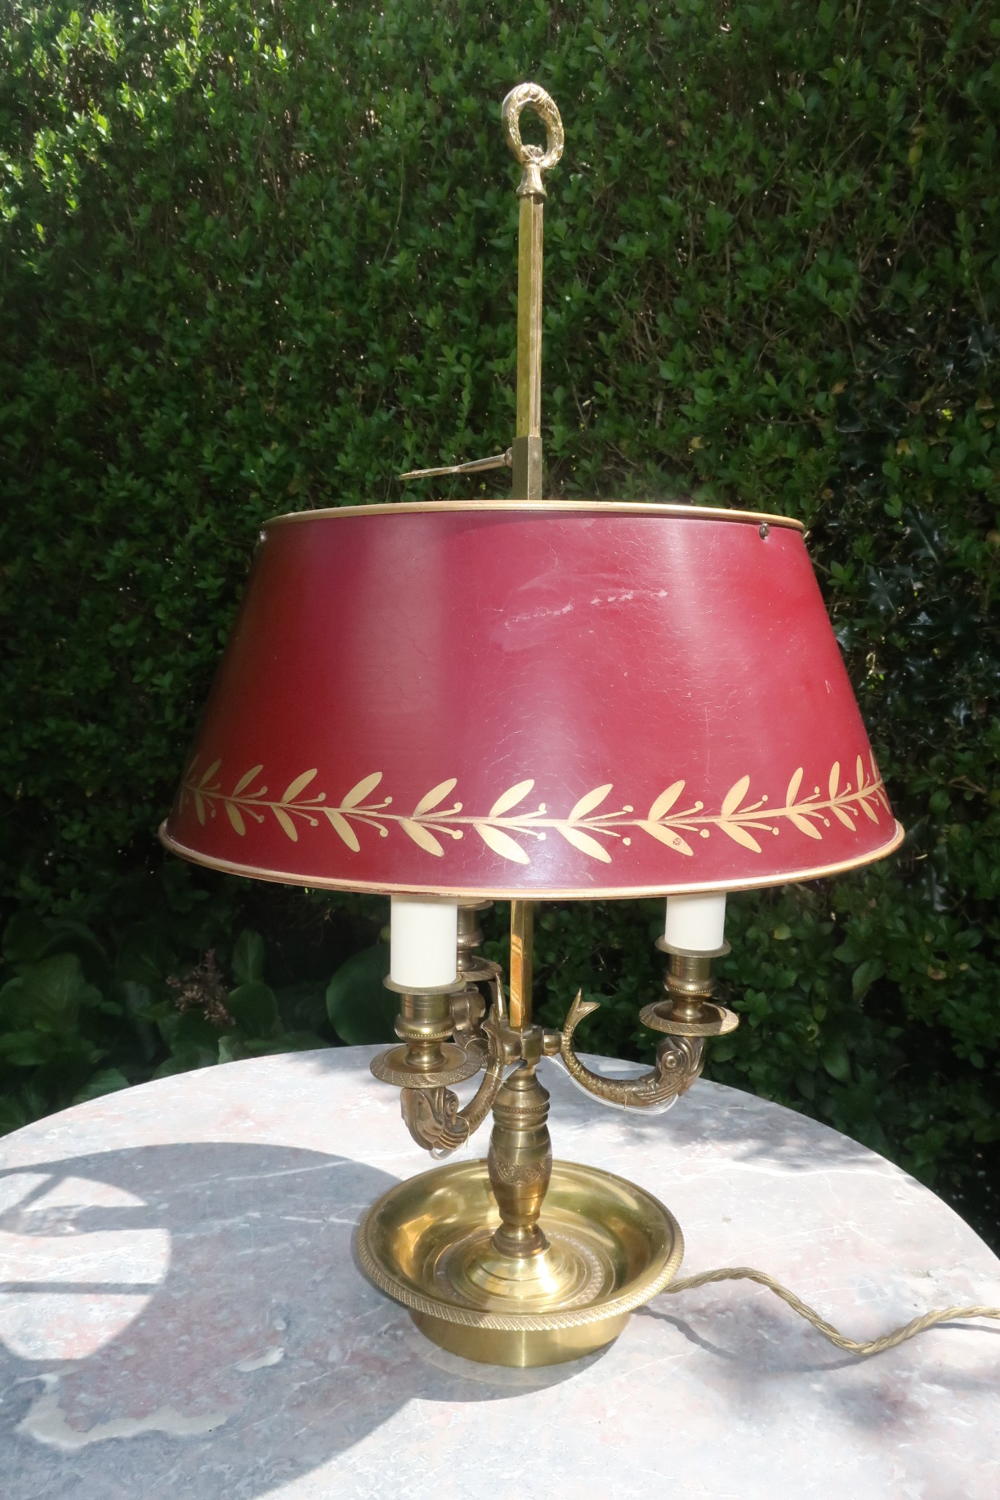 French Bouillotte lamp with red toleware shade